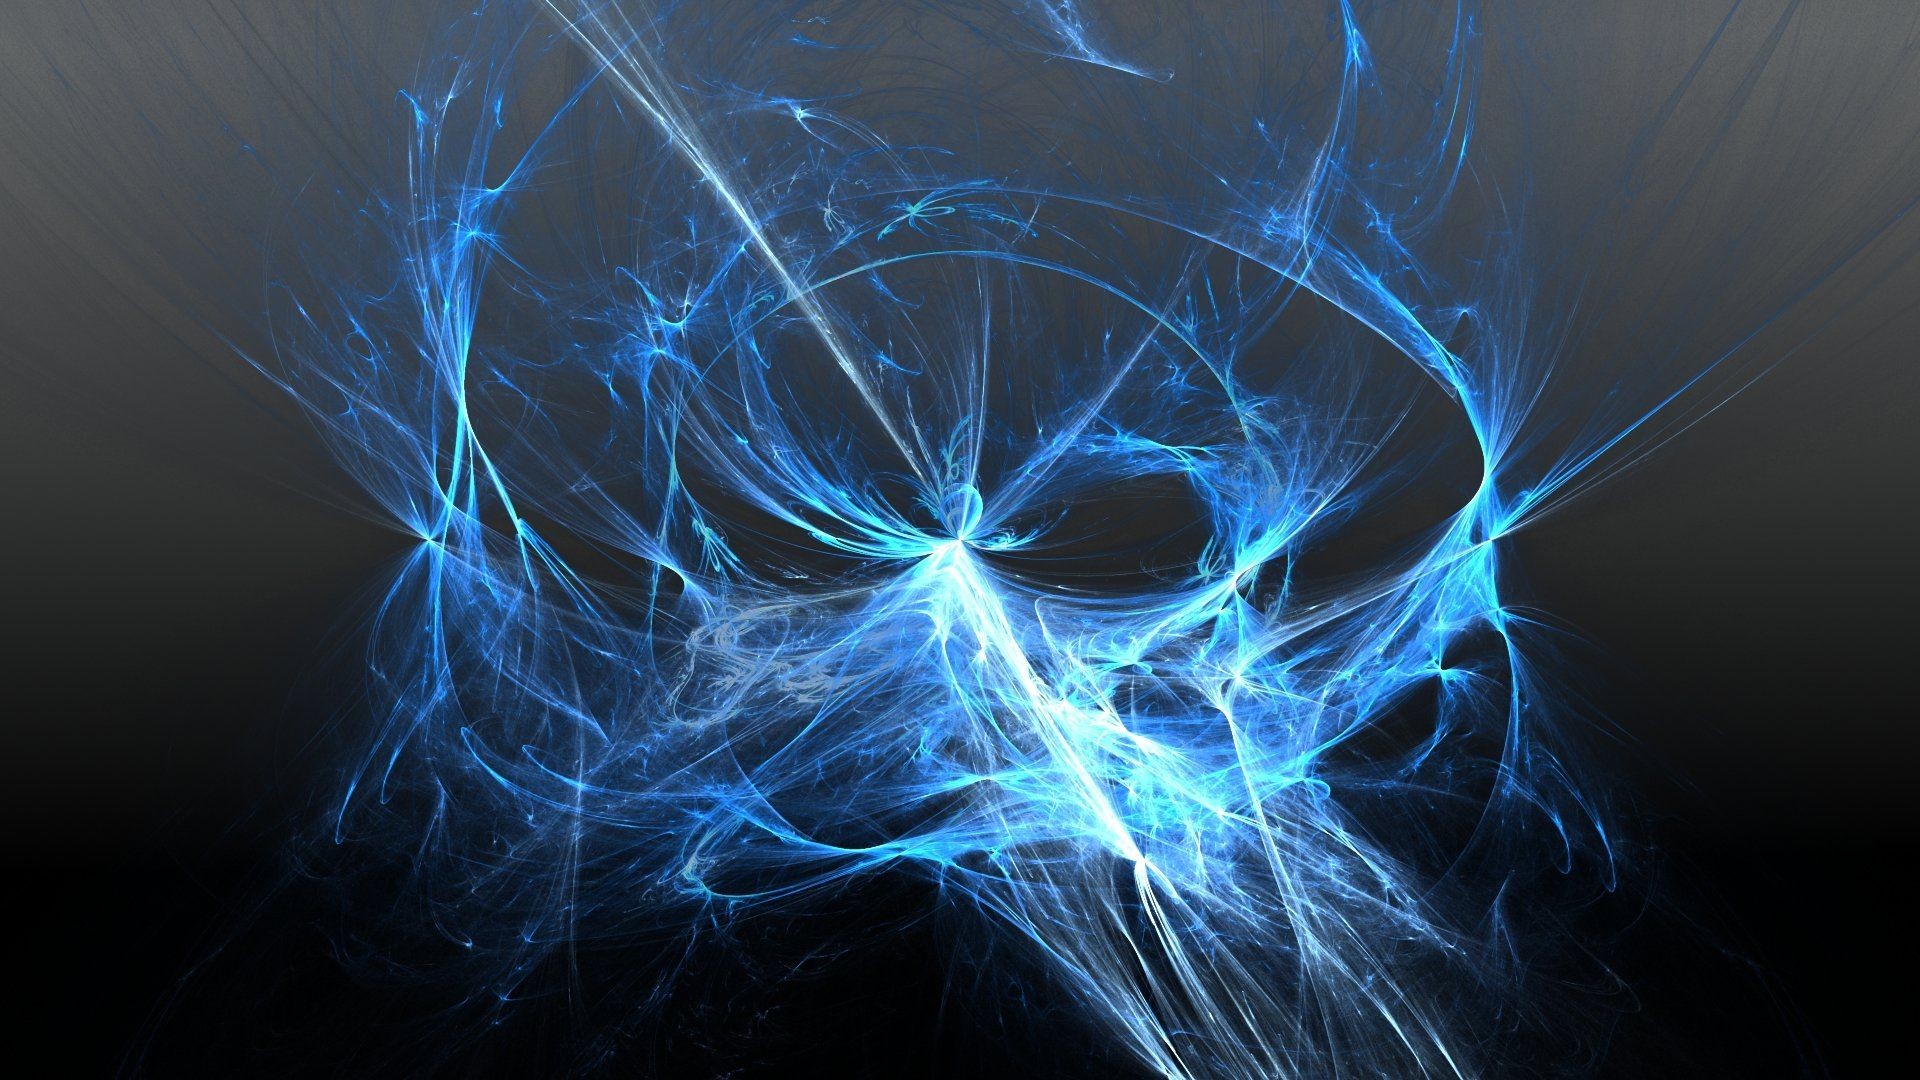 1920x1080, Blue Skull Live Wallpaper Android Apps On - Hd Blue Flame - HD Wallpaper 